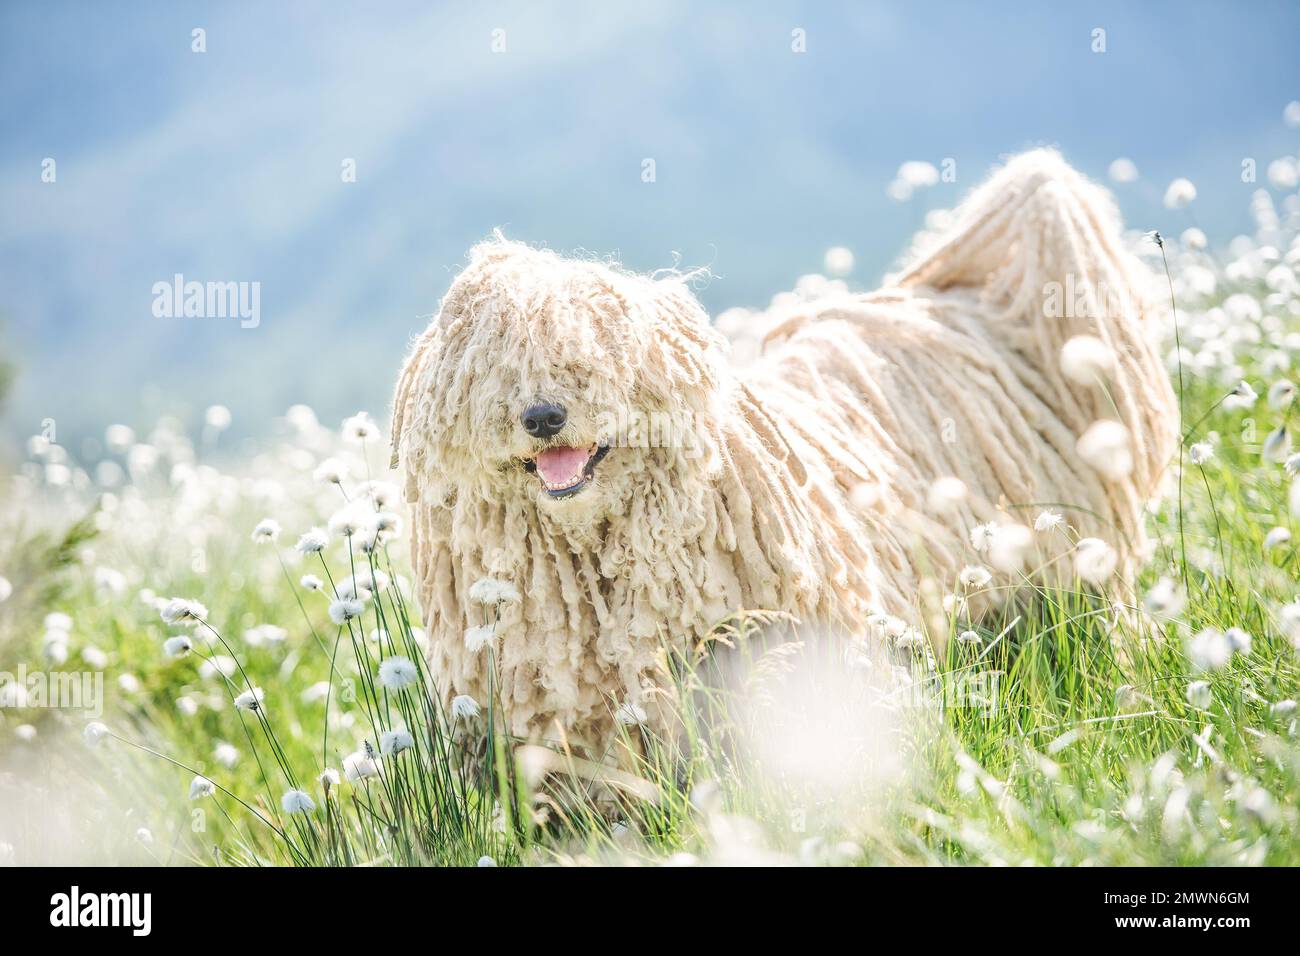 Hungarian puli dog on green grass and white flowers n the Carpathian mountains, Ukraine, Europe. Stock Photo